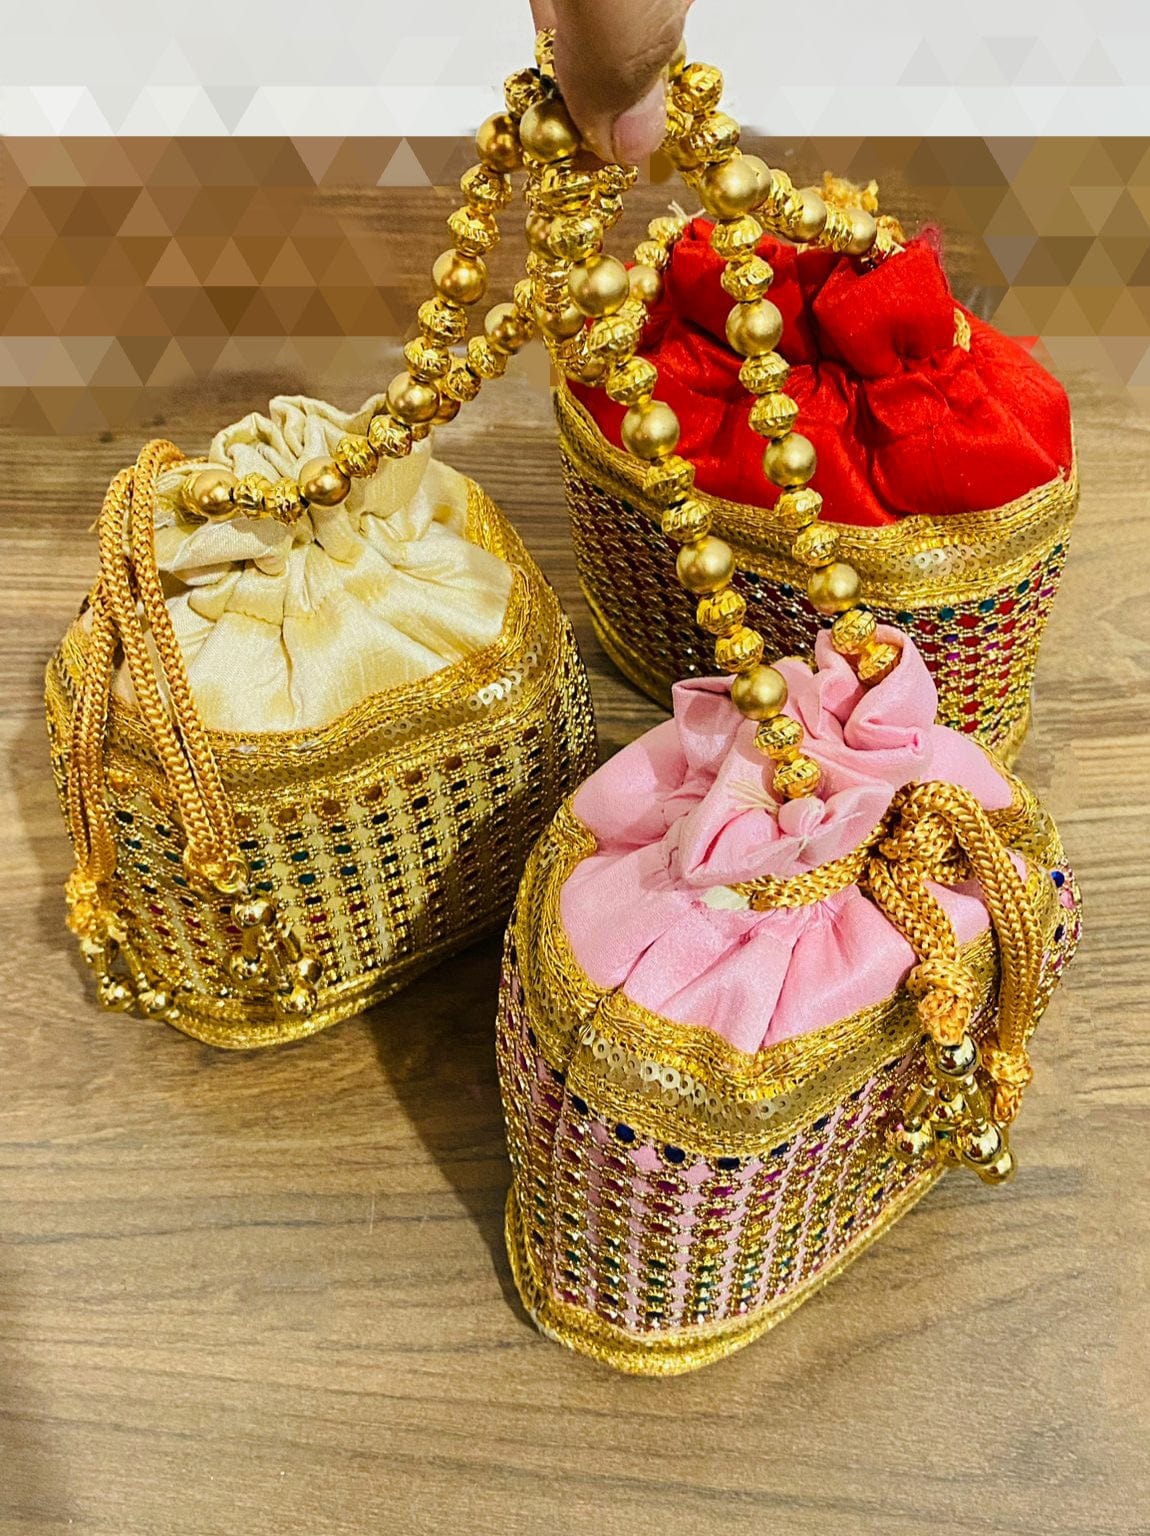 180 Rs each on buying 🏷30+ qty | Call 📞 at 8619550223 Women's Potli Bag LAMANSH® 8*10 inch Designer Potli bags with Golden Moti Handle for Giveaways / Return Gifts 🎁 Favours for guests / wedding favors for guests